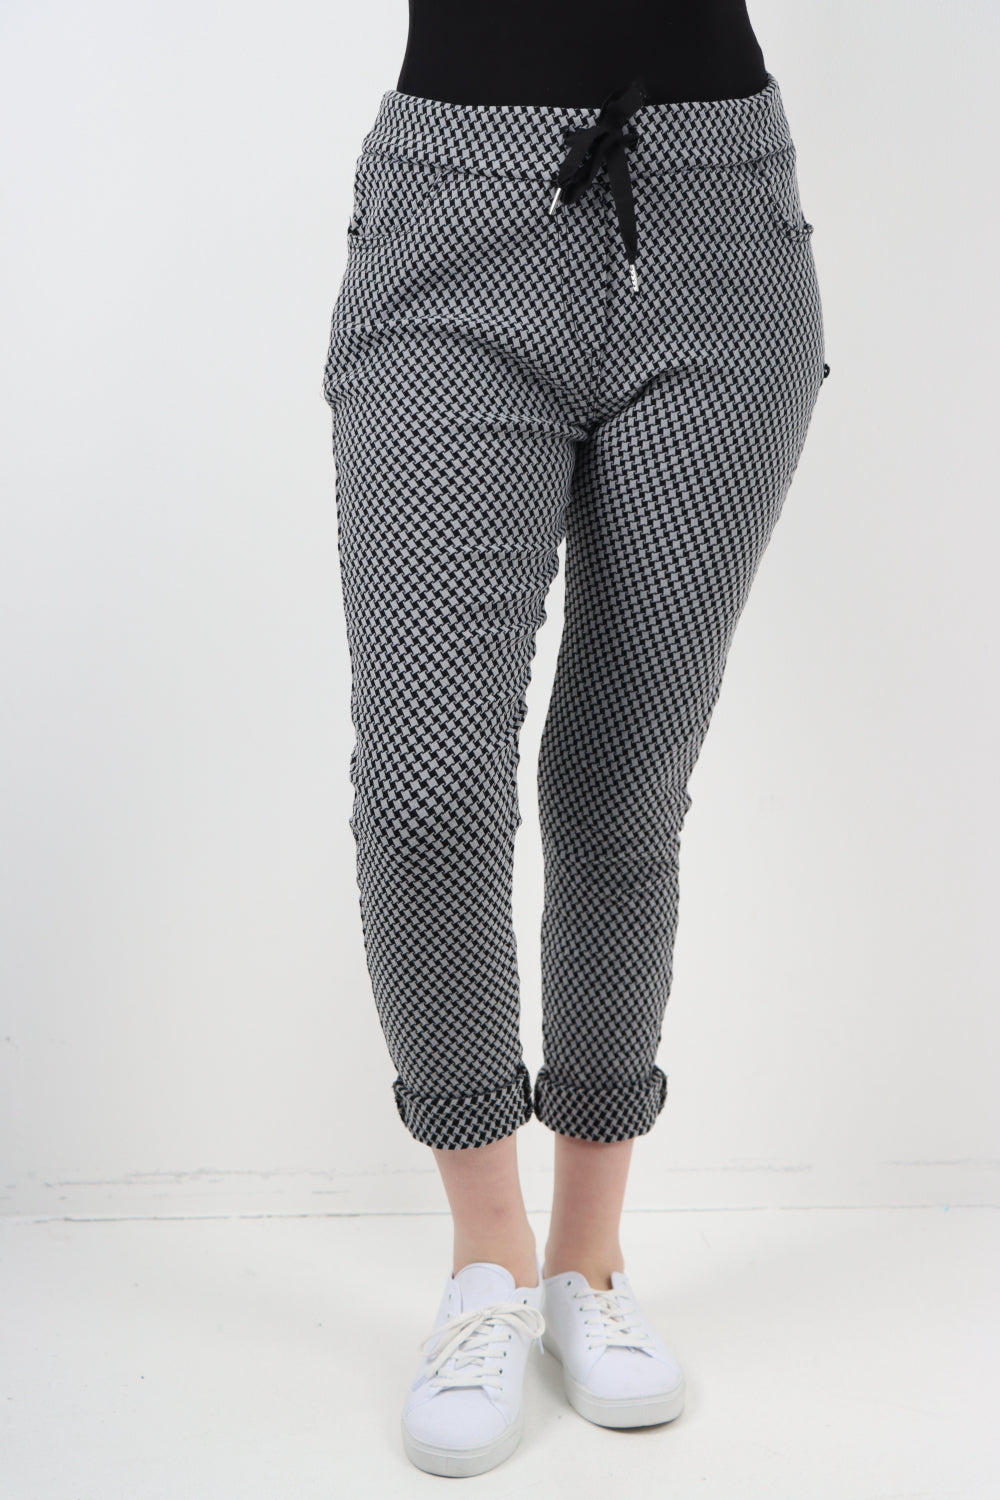 Dog Tooth Printed Pockets Trousers